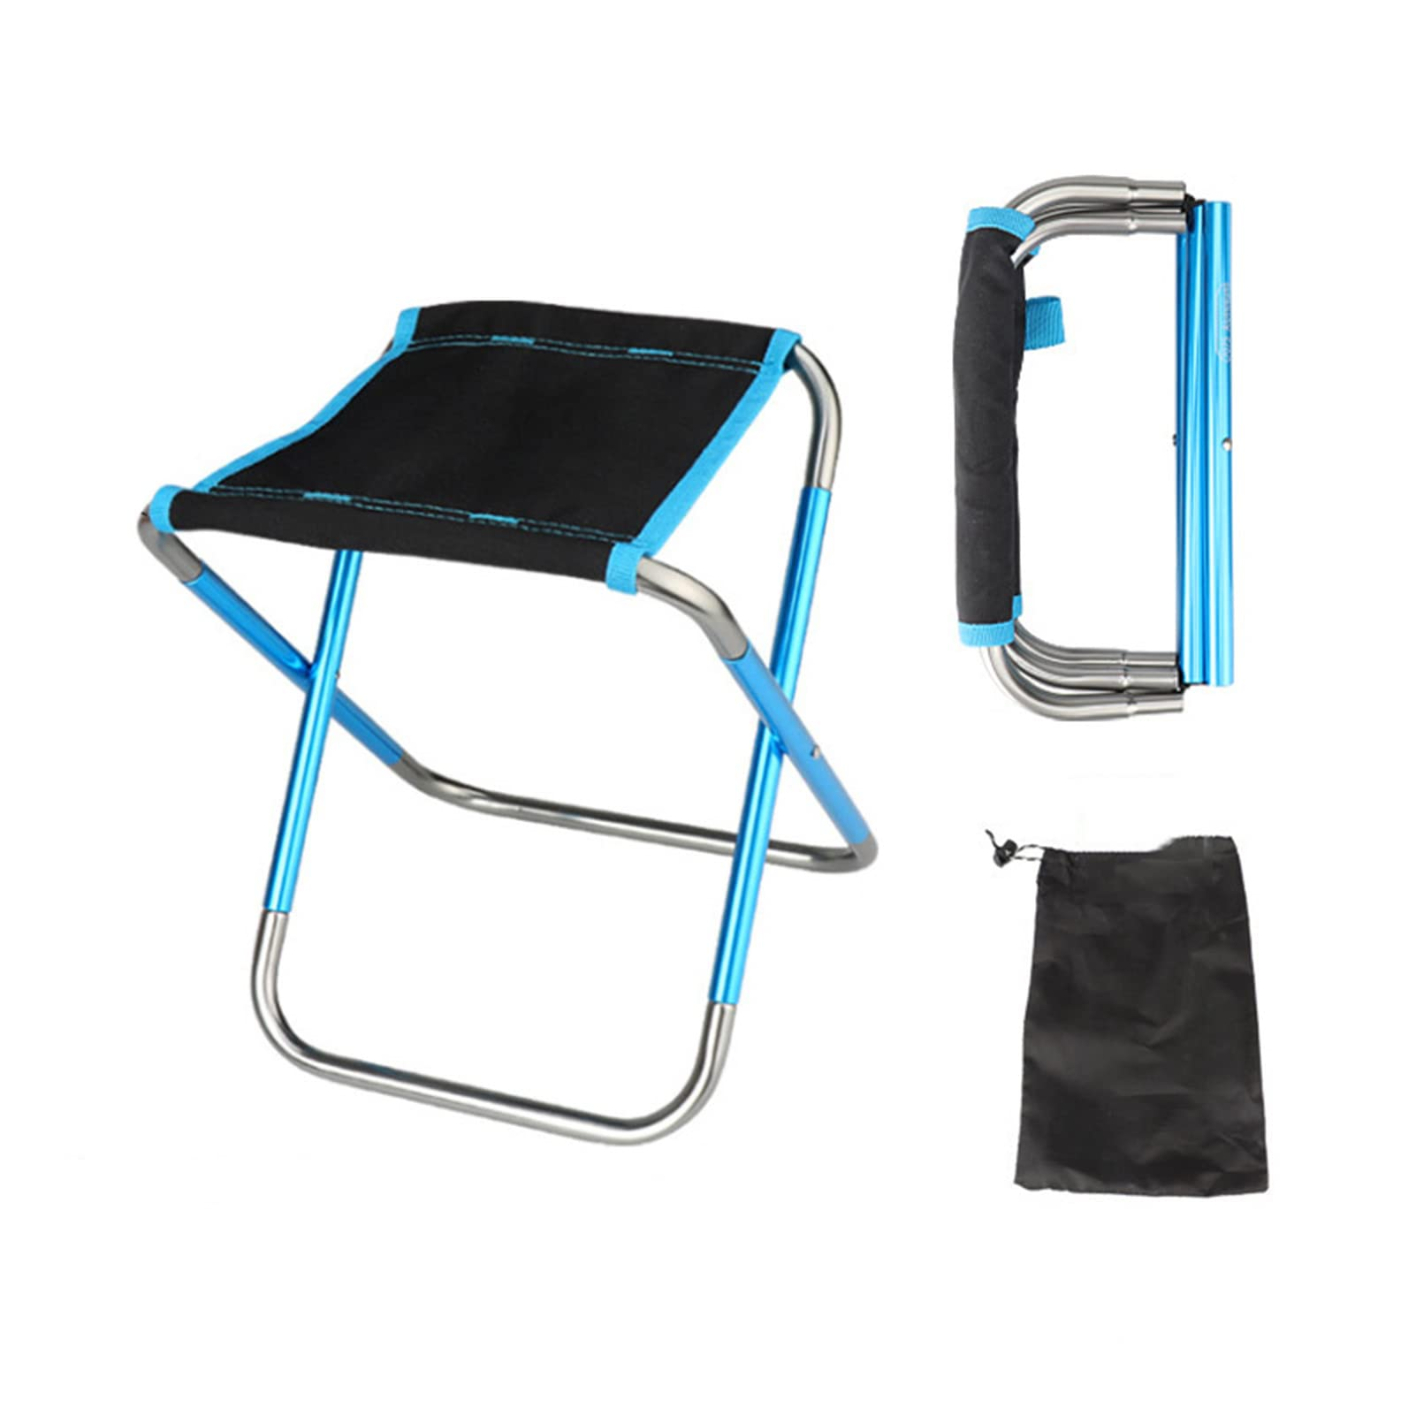 Fishing Beach Chair Outdoor Aluminum Alloy Folding Stool Folding in 3 Seconds Lightweight and Easy to Carry Blue/Orange 21*18*35cm/26*23*39cm